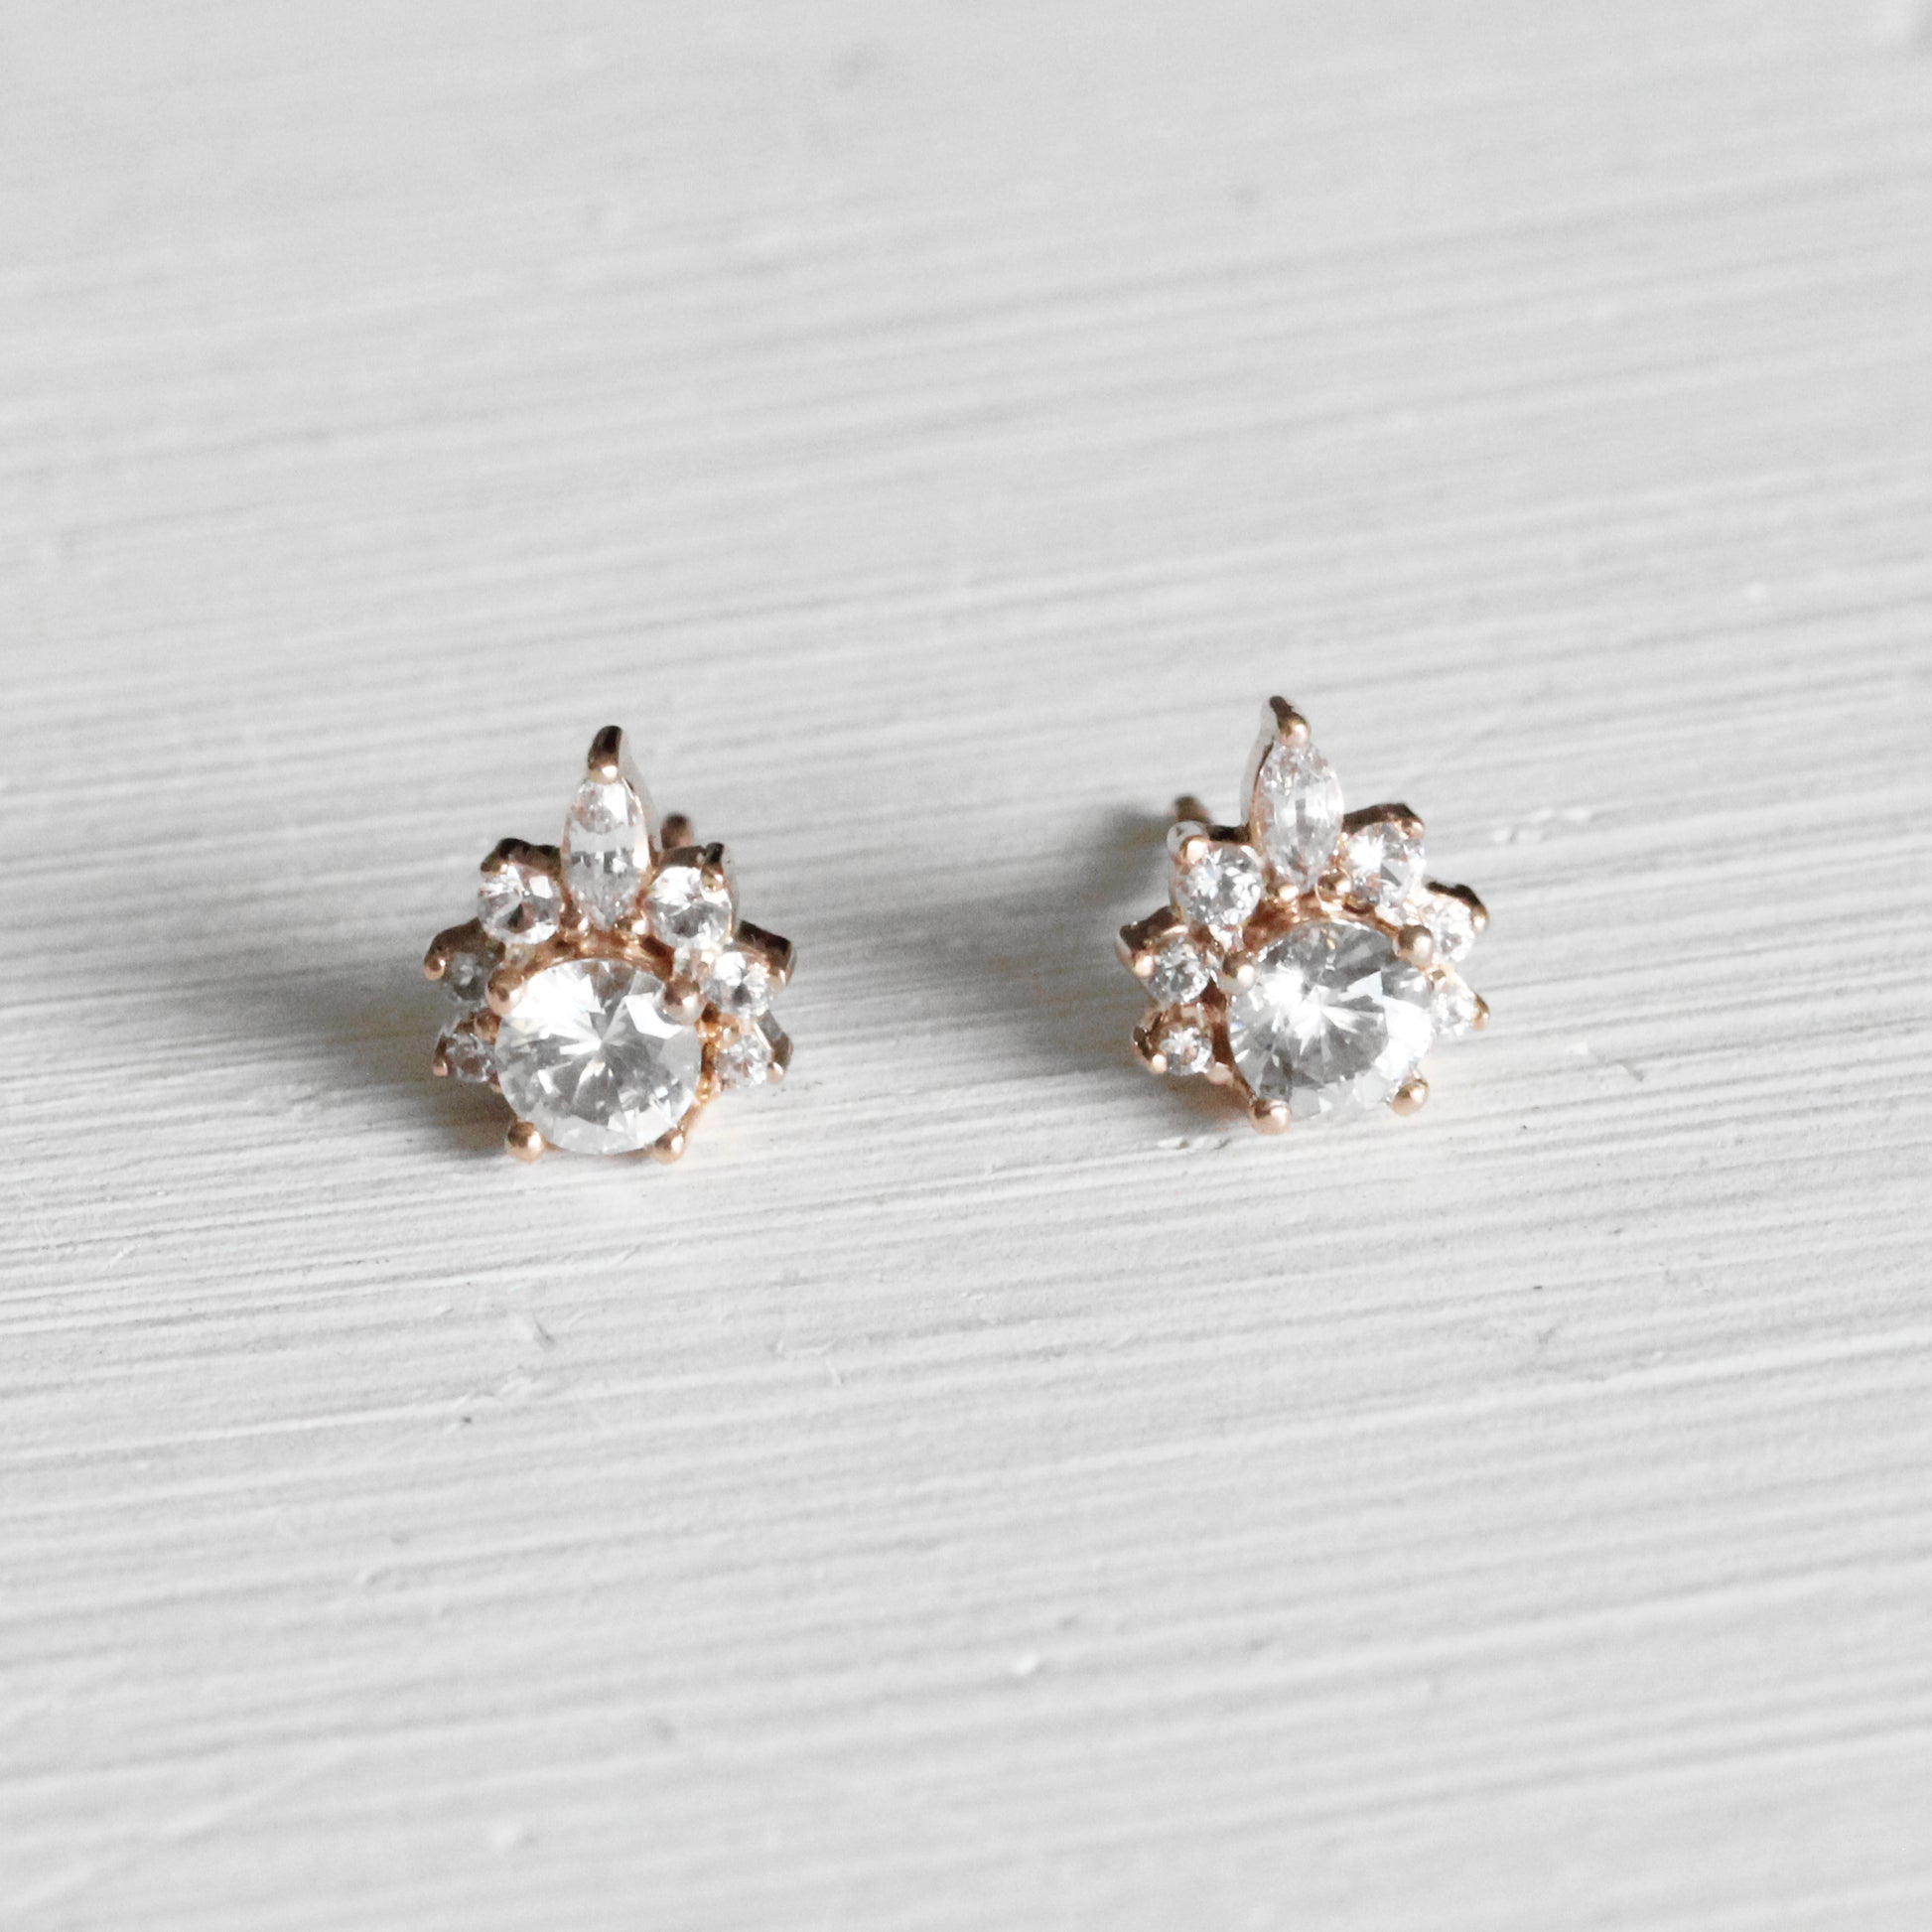 Zoe Earrings with White Sapphires - 14k of Your Choice - Made to Order - Midwinter Co. Alternative Bridal Rings and Modern Fine Jewelry